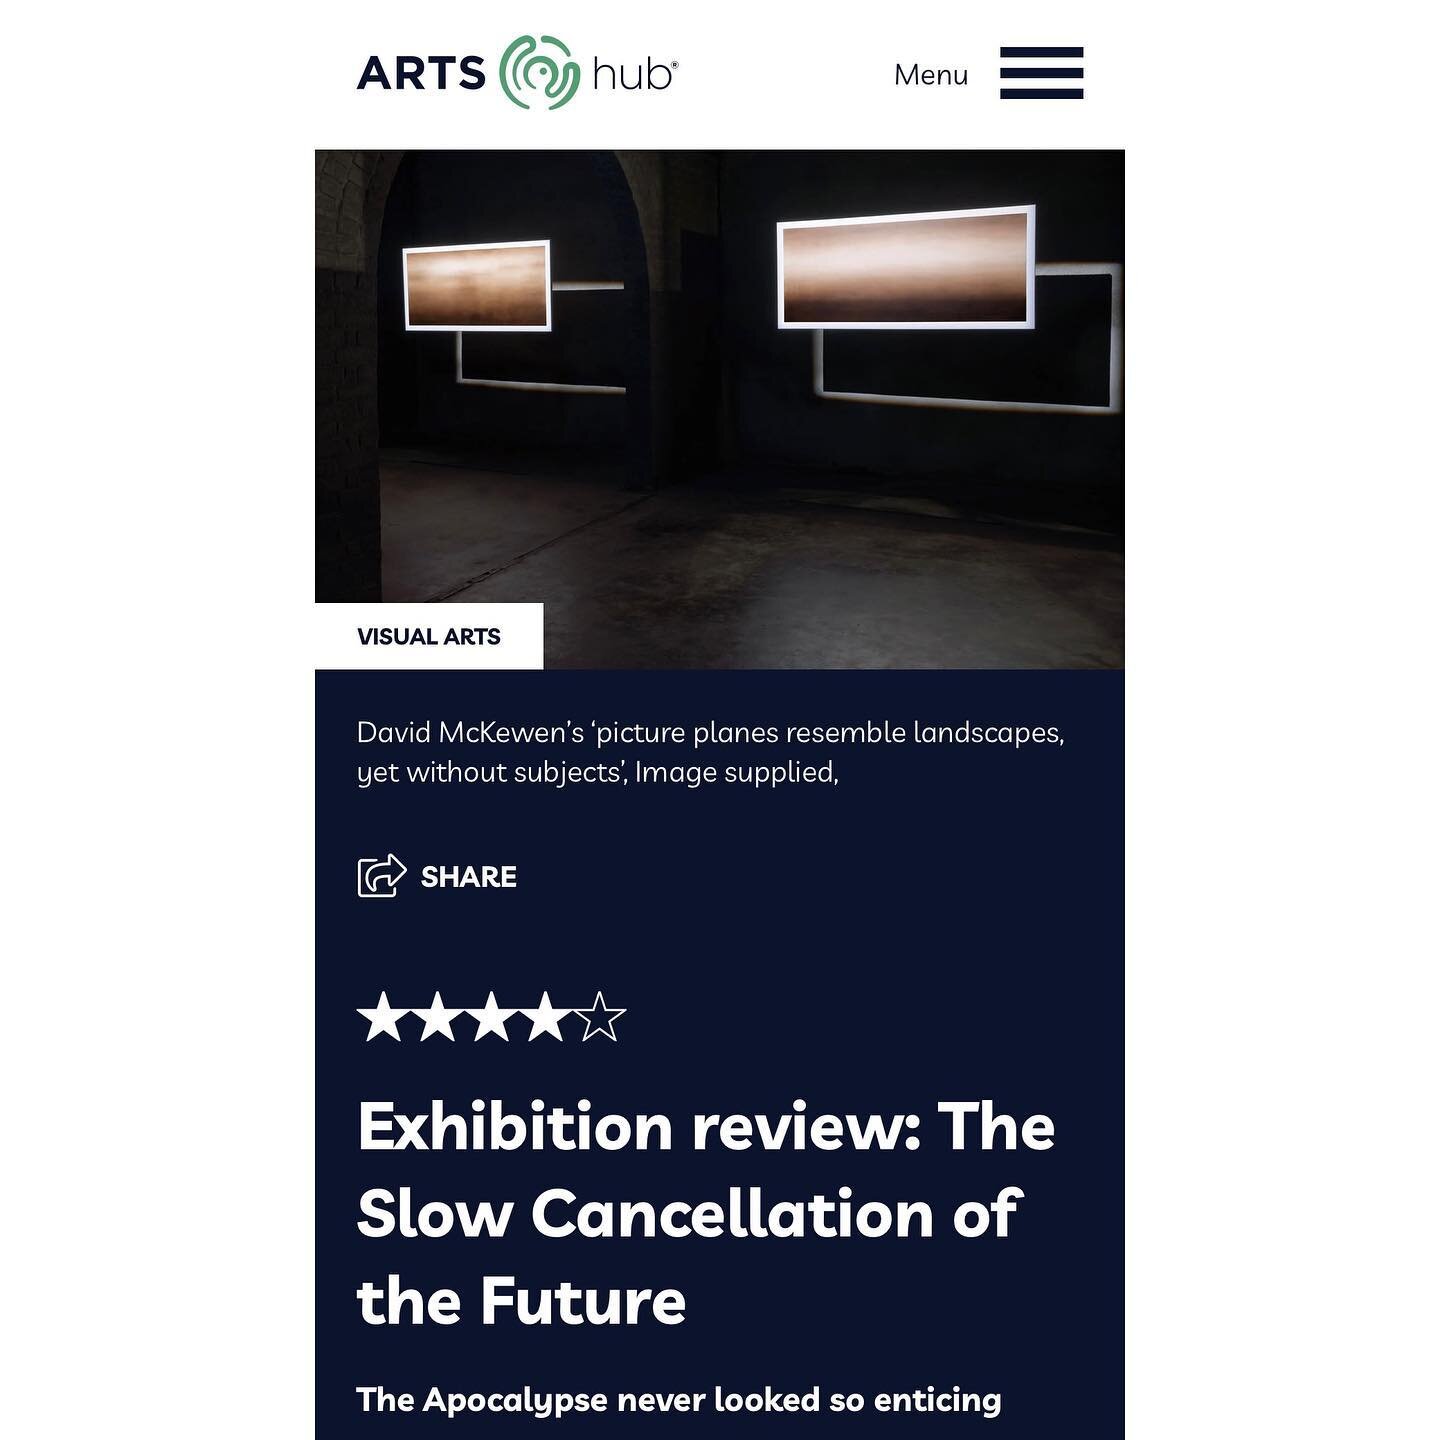 Thanks to Pamela See and ArtsHub for this review! The show is open for 2 more days, Friday and Saturday 11am-5pm at Spring Hill Reservoirs. Link in bio I guess?

This project has been assisted by the Australian Government through the Australia Counci